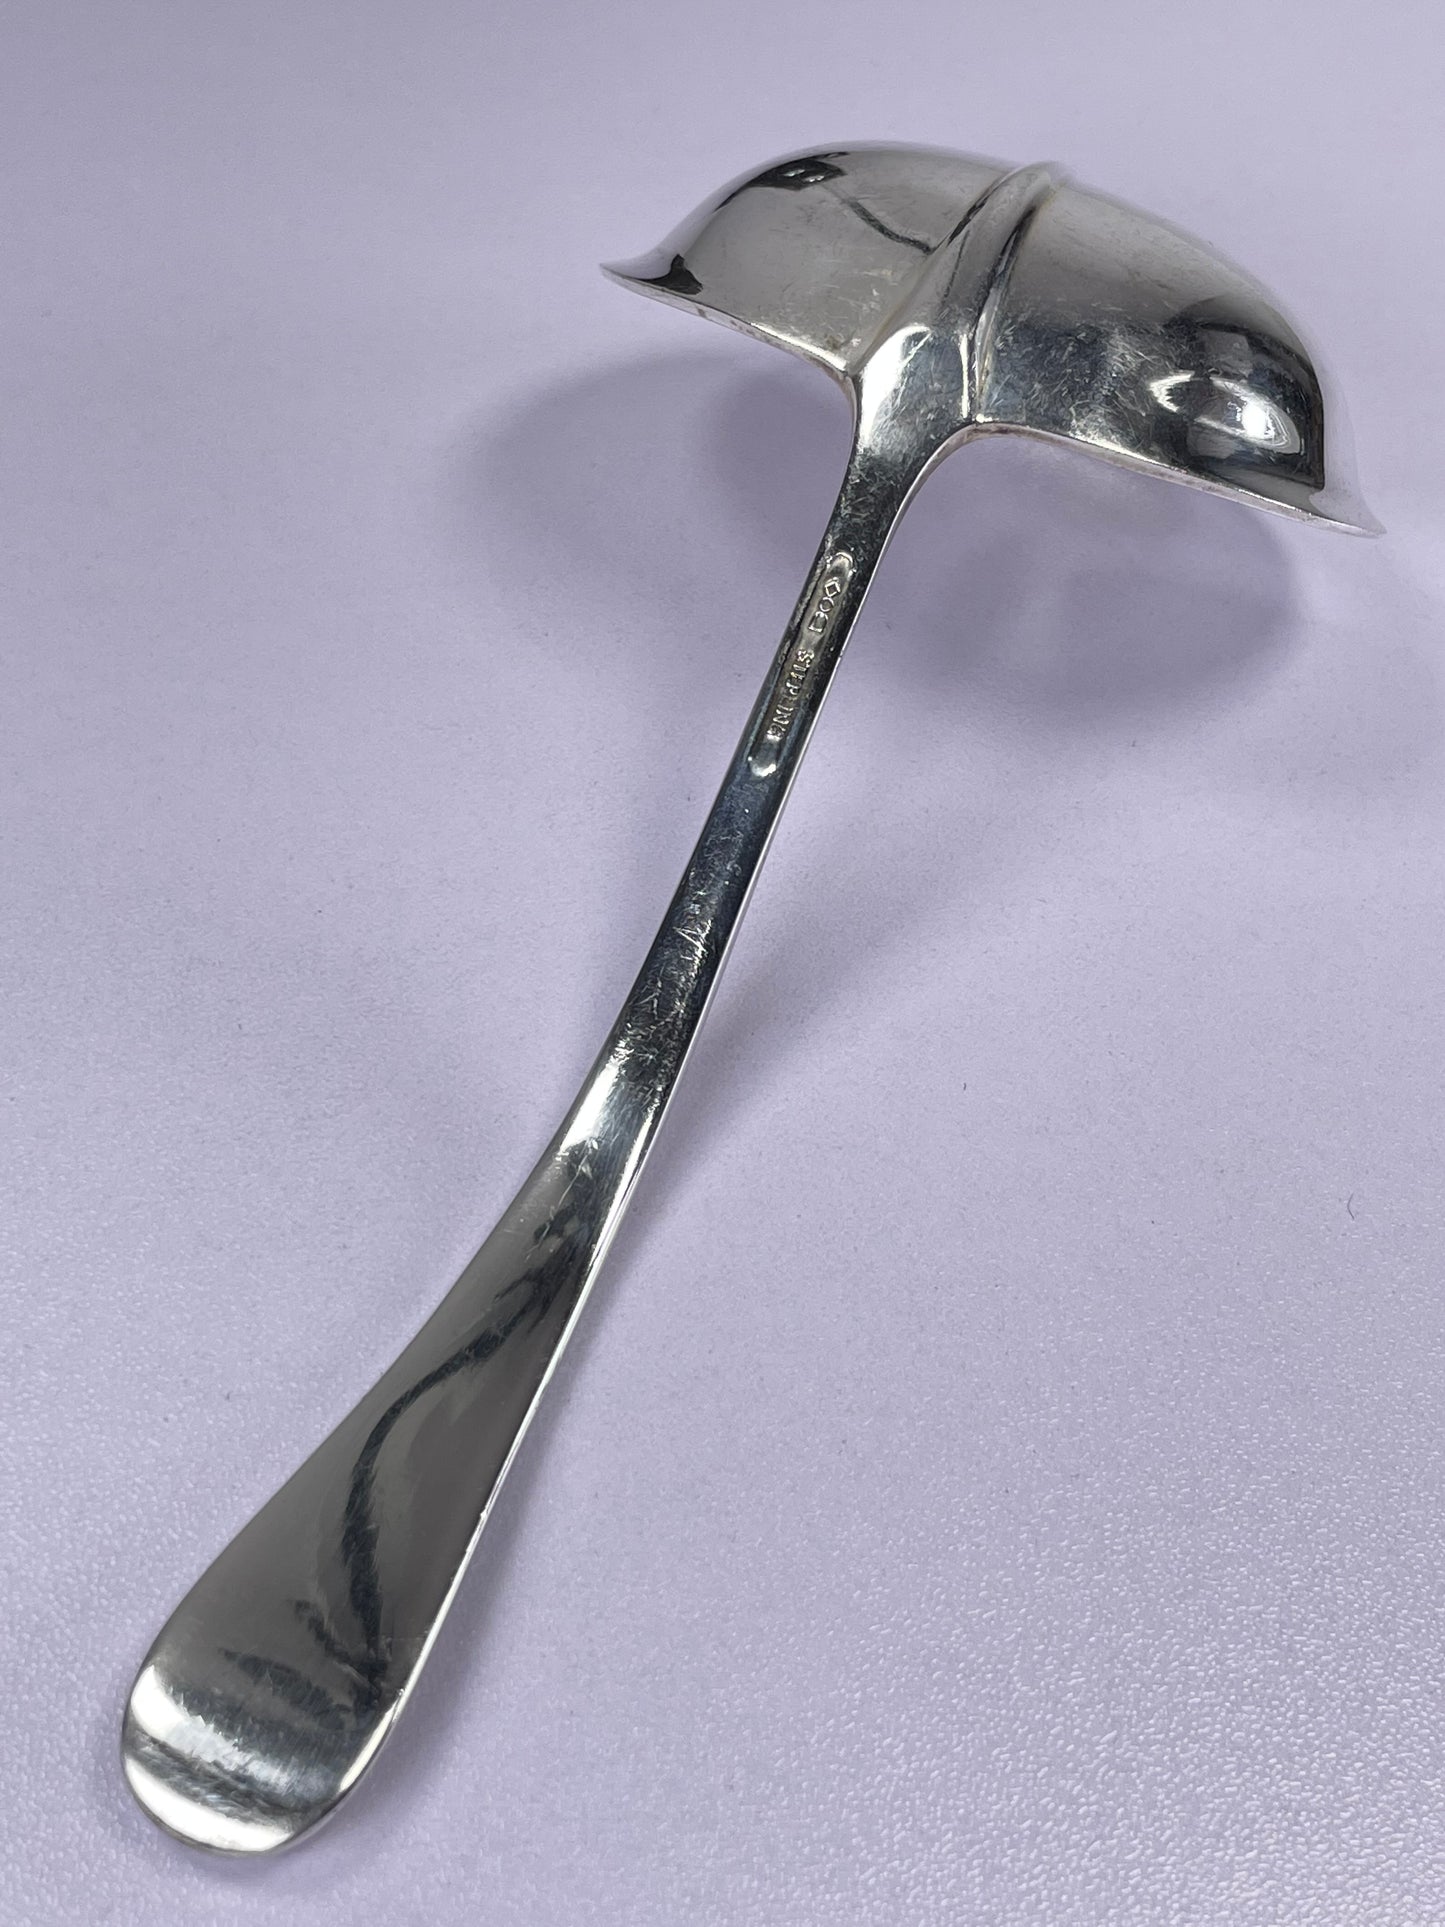 Antique Sterling Silver Rattail Antique Dominick and Haff Gravy Ladle 2.81 ozt Reed and Barton